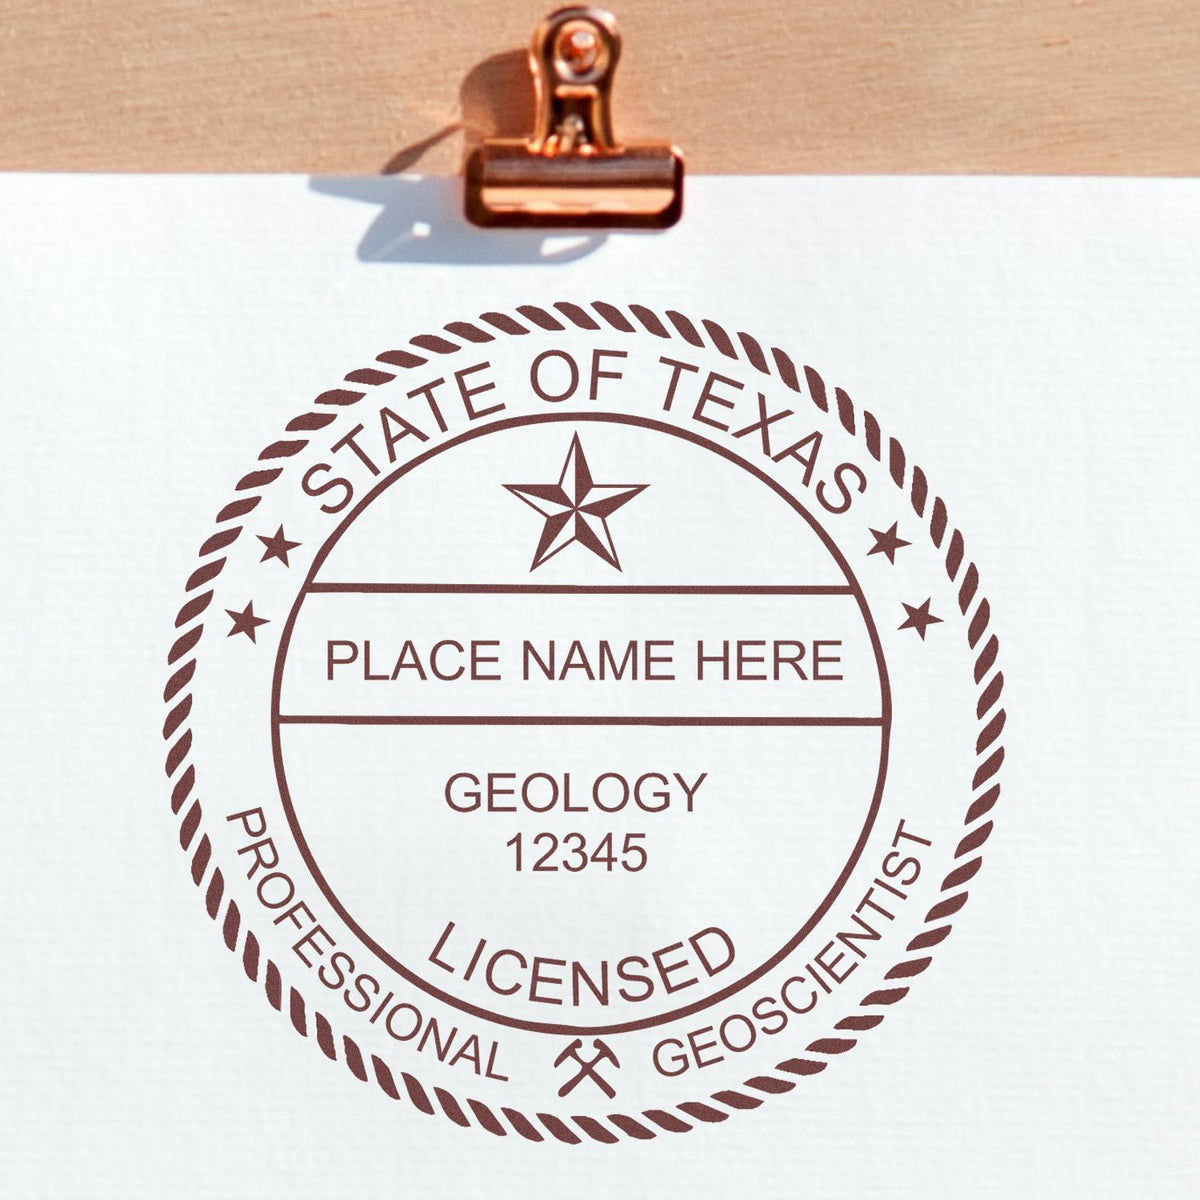 Another Example of a stamped impression of the Slim Pre-Inked Texas Professional Geologist Seal Stamp on a office form